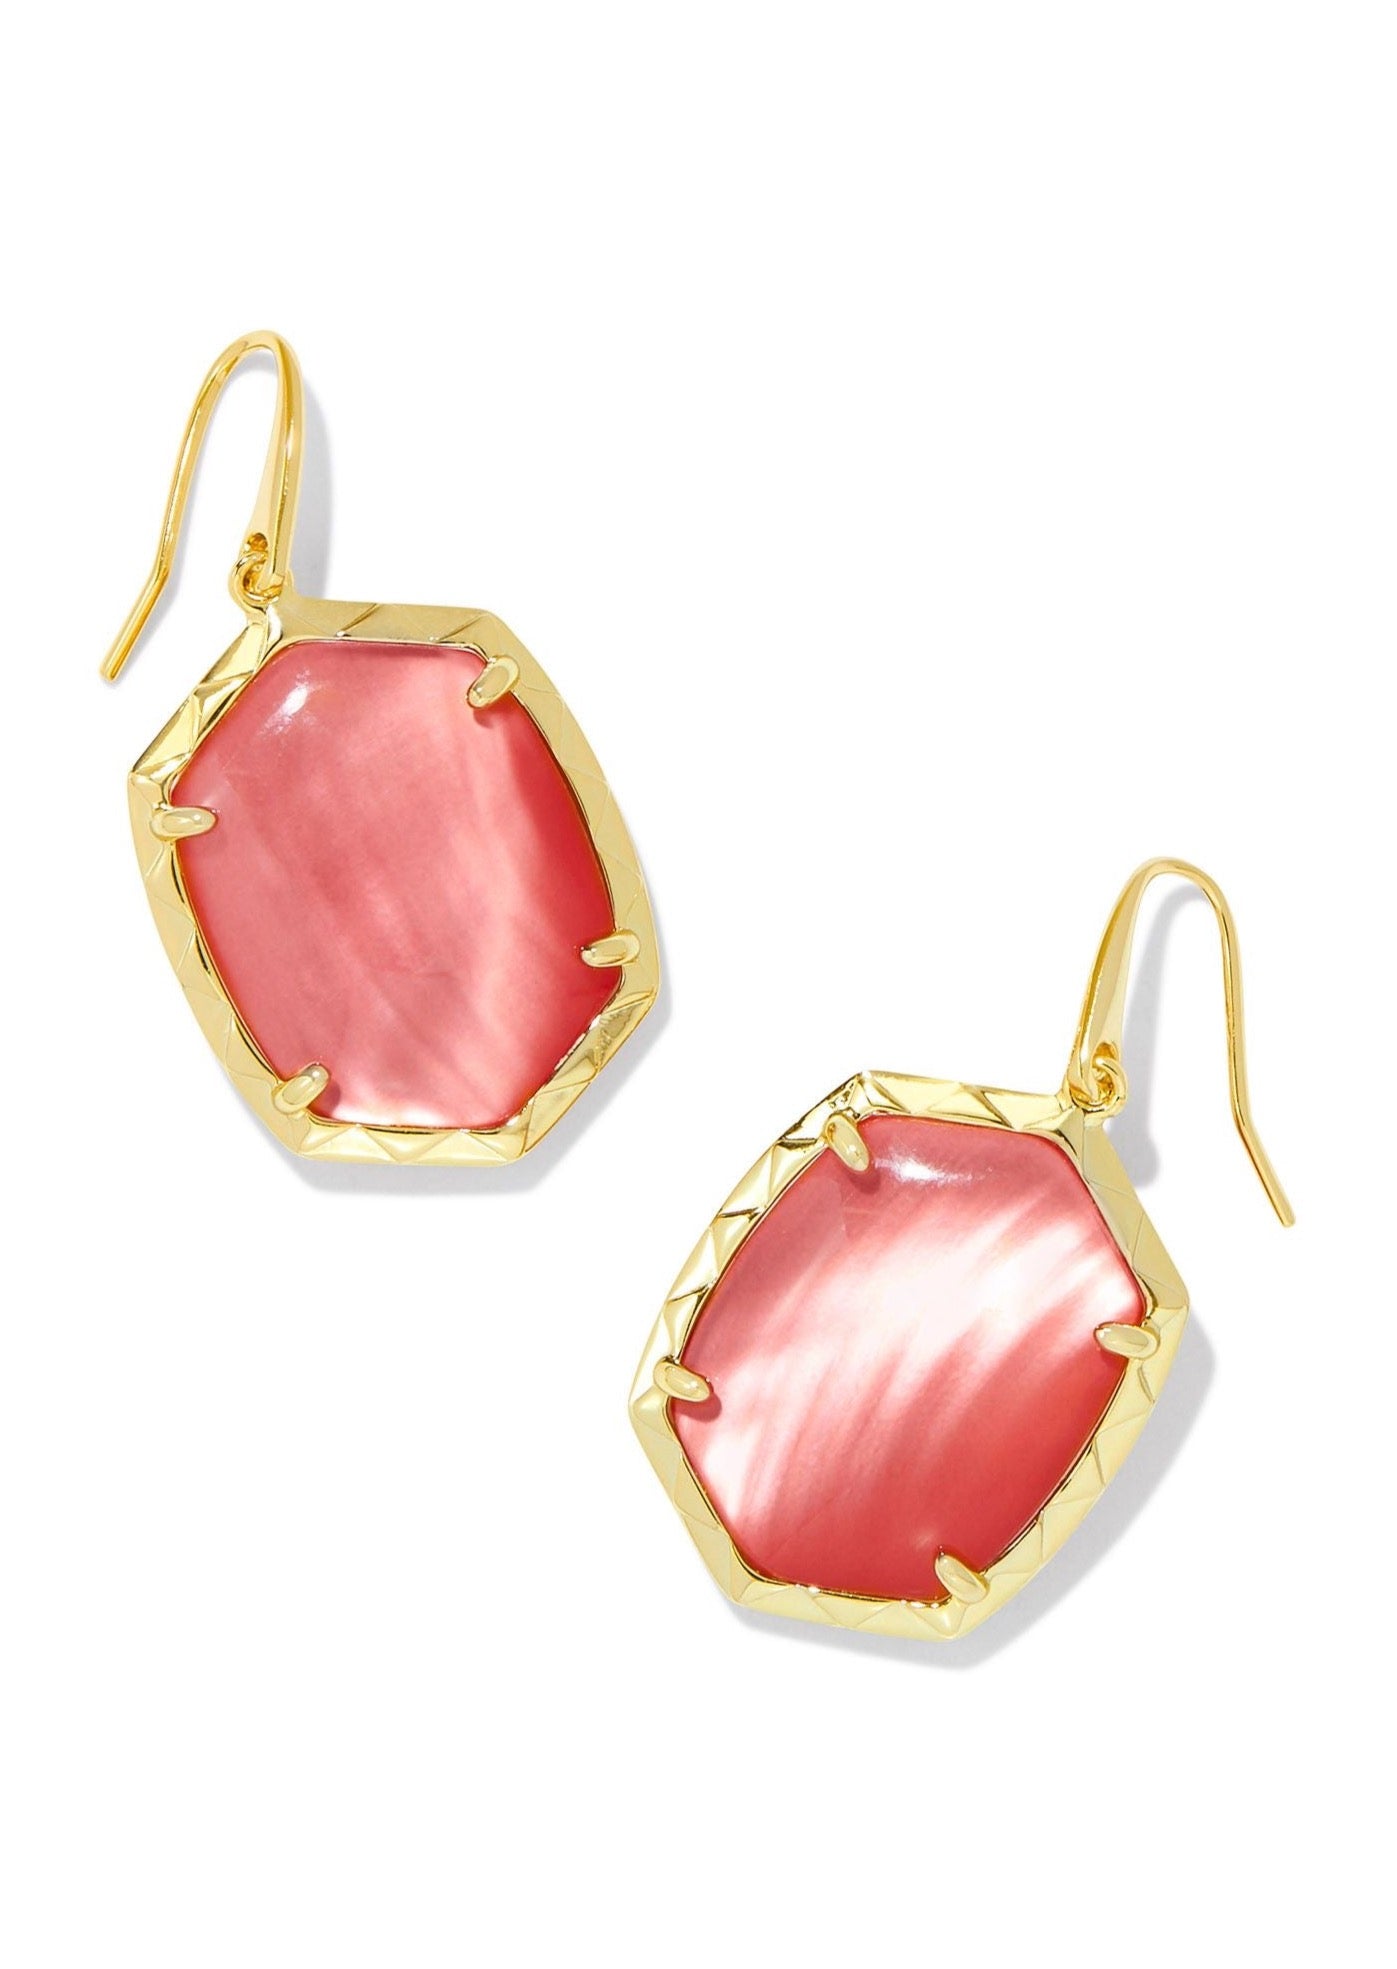 Daphne Drop Earrings - Gold/Coral Pink Mother of Pearl